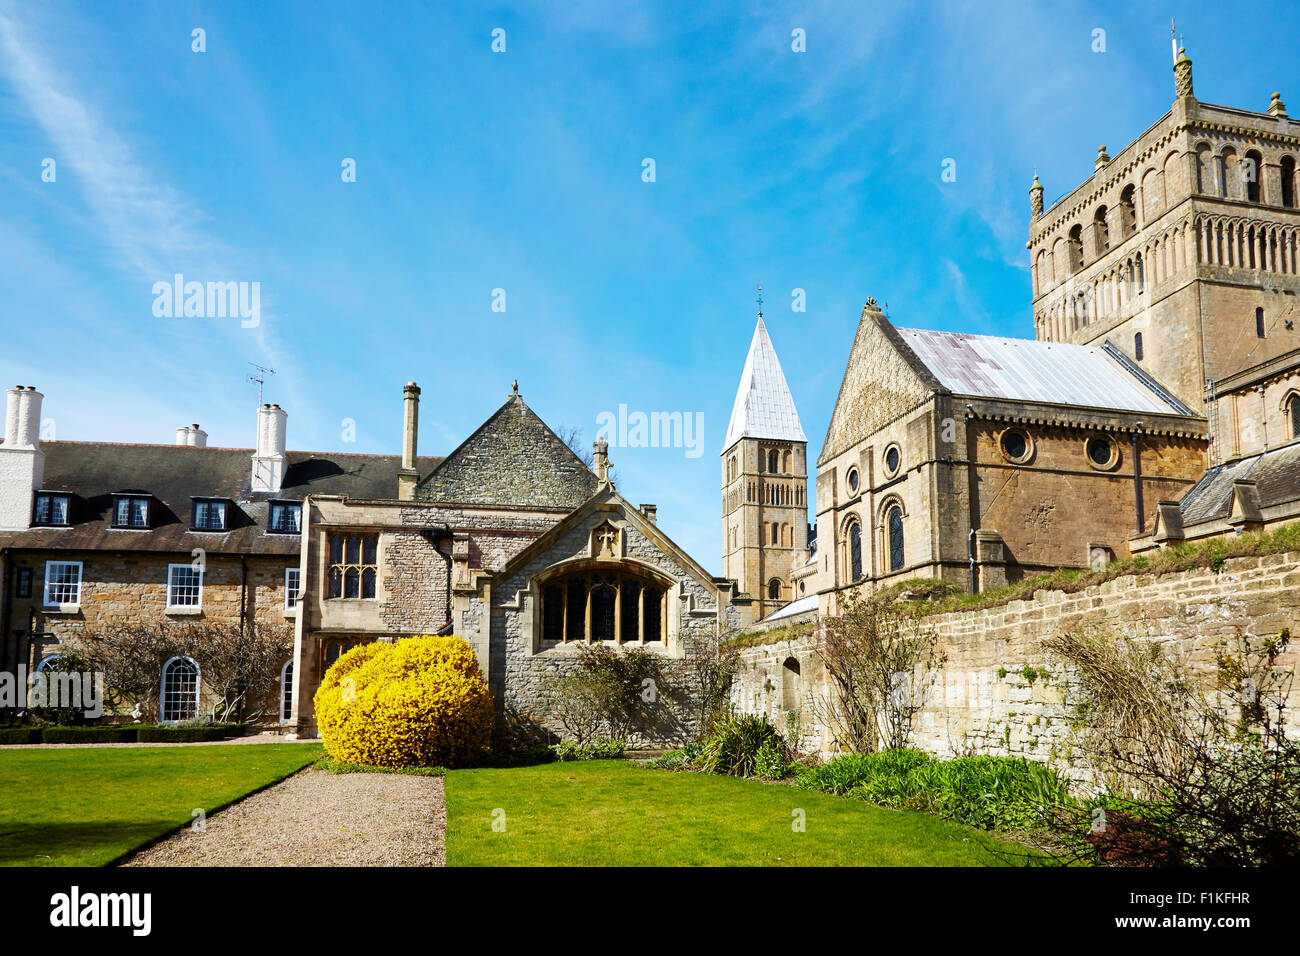 View of The Minster and Archbishop's Palace in Southwell, Nottinghamshire, England, UK. Stock Photo